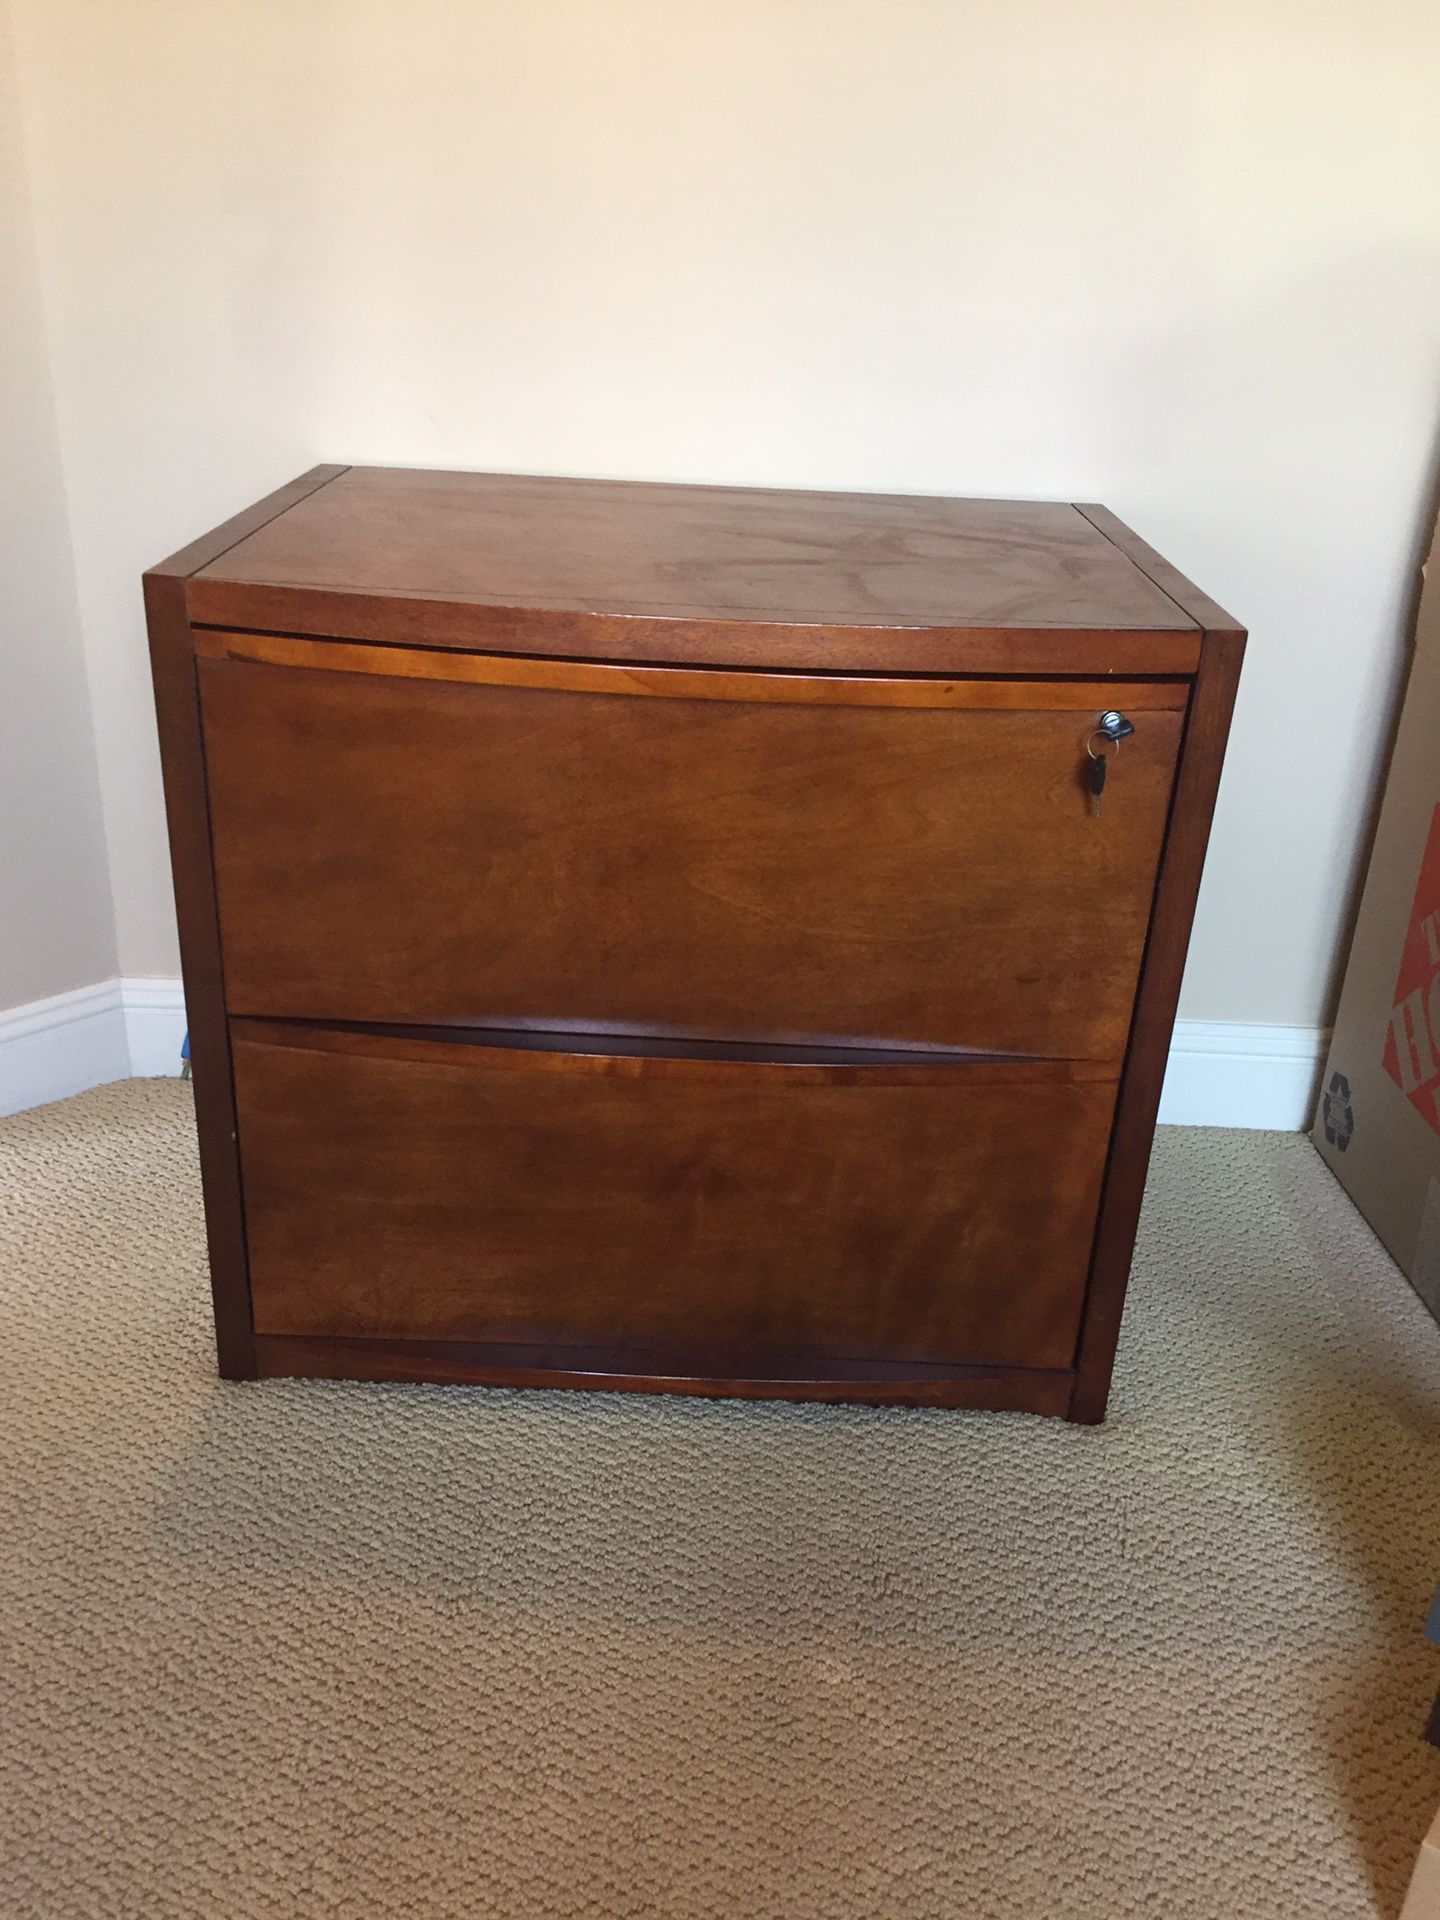 Ethan Allen File Cabinet with key - solid wood - beautiful